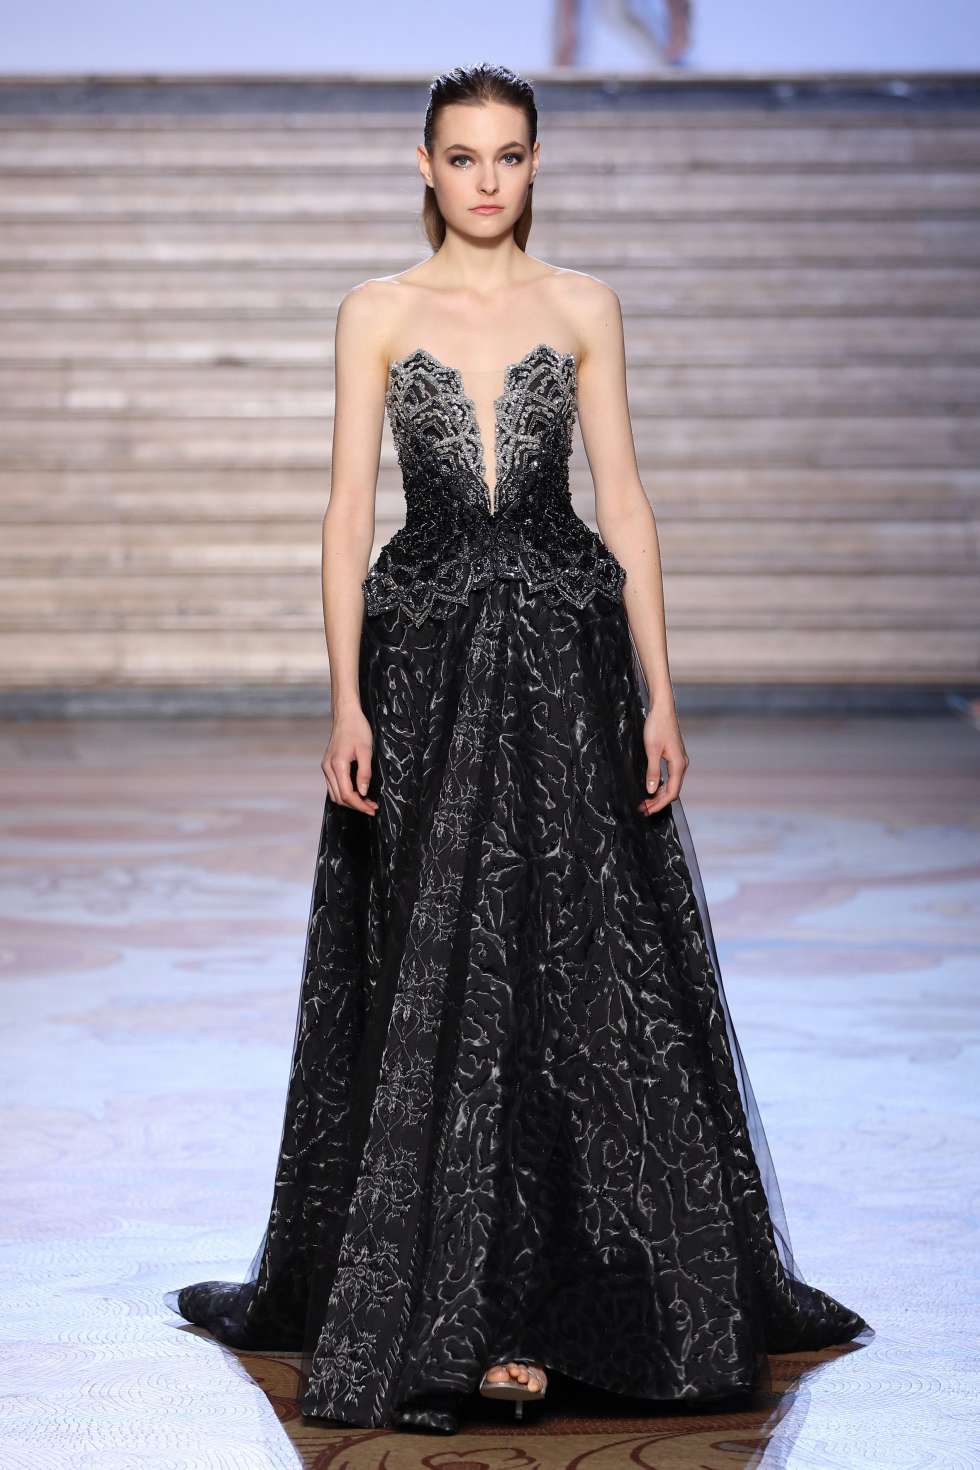 Your Engagement Dress from Tony Ward Spring/Summer 2020 Couture Collection